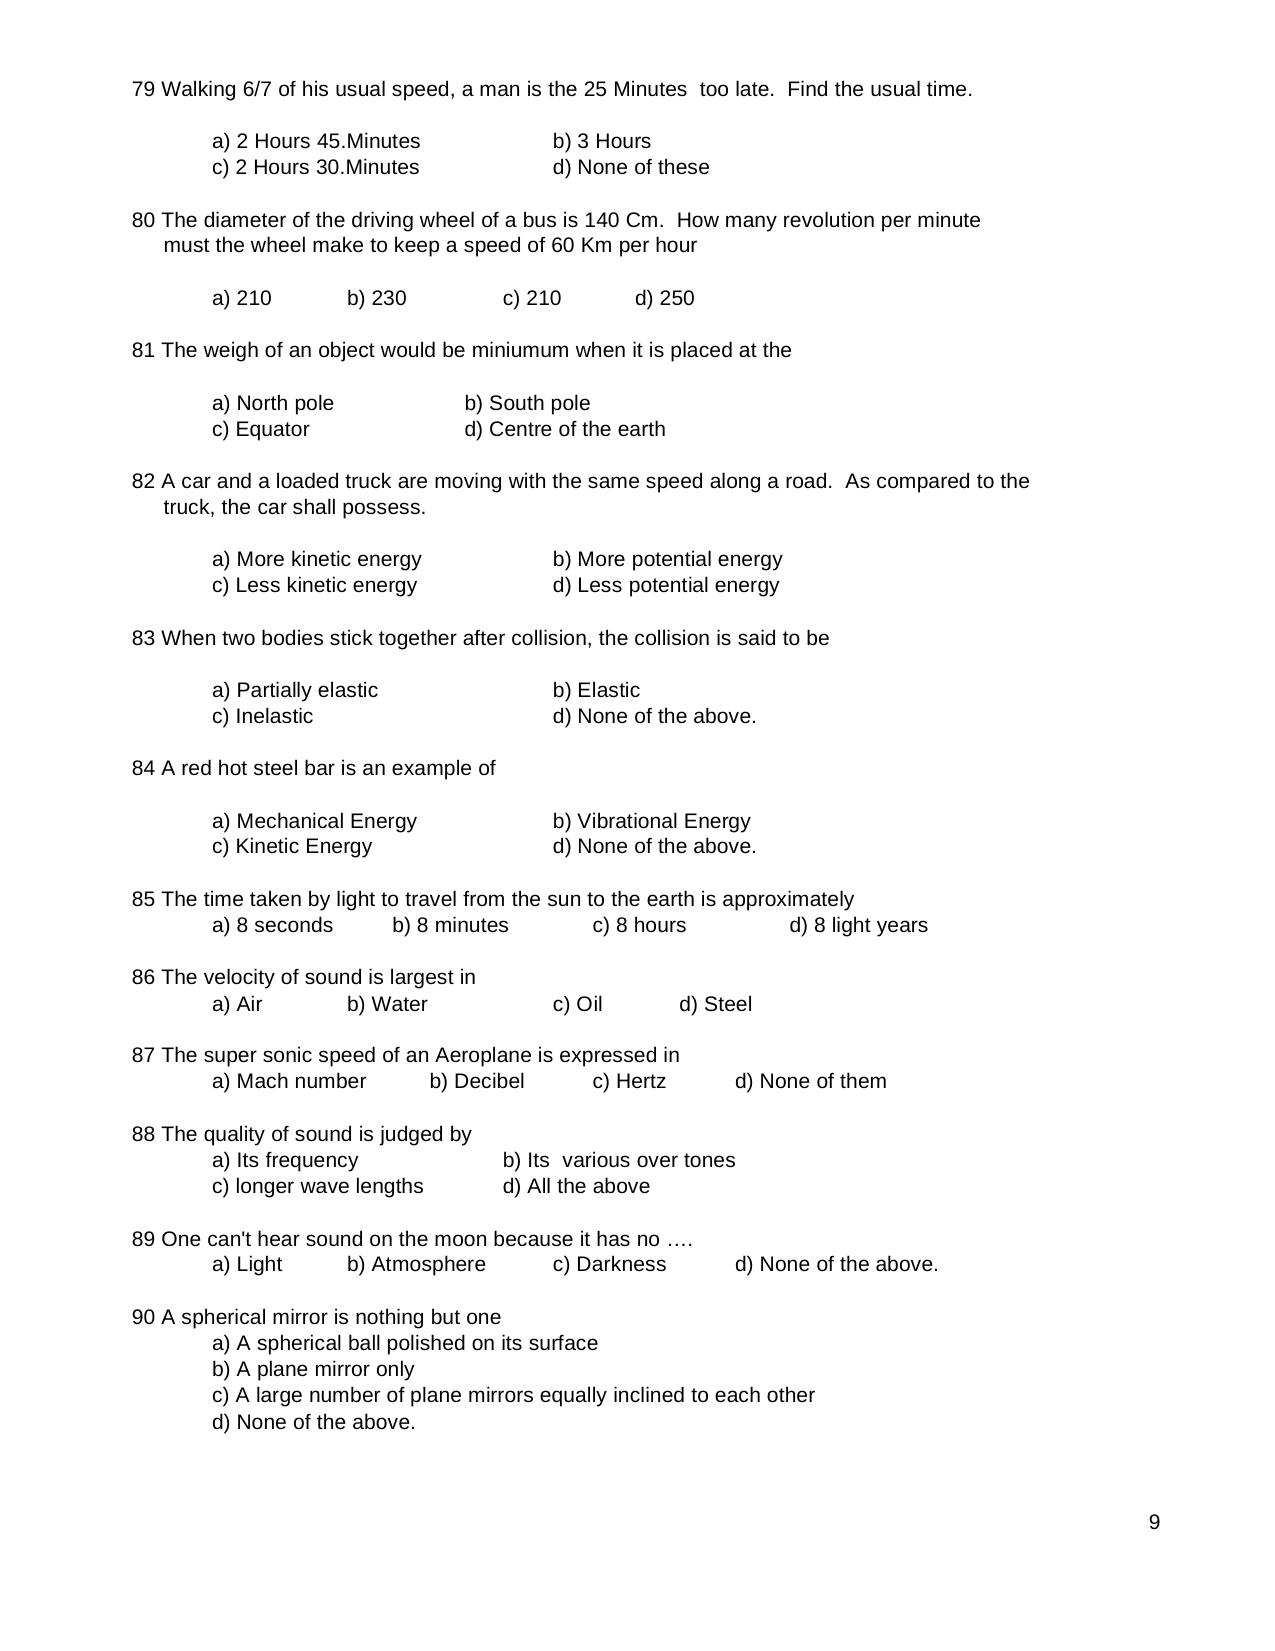 TNPSC Assistant System Engineer Sample Papers Numerical Ability - Page 9